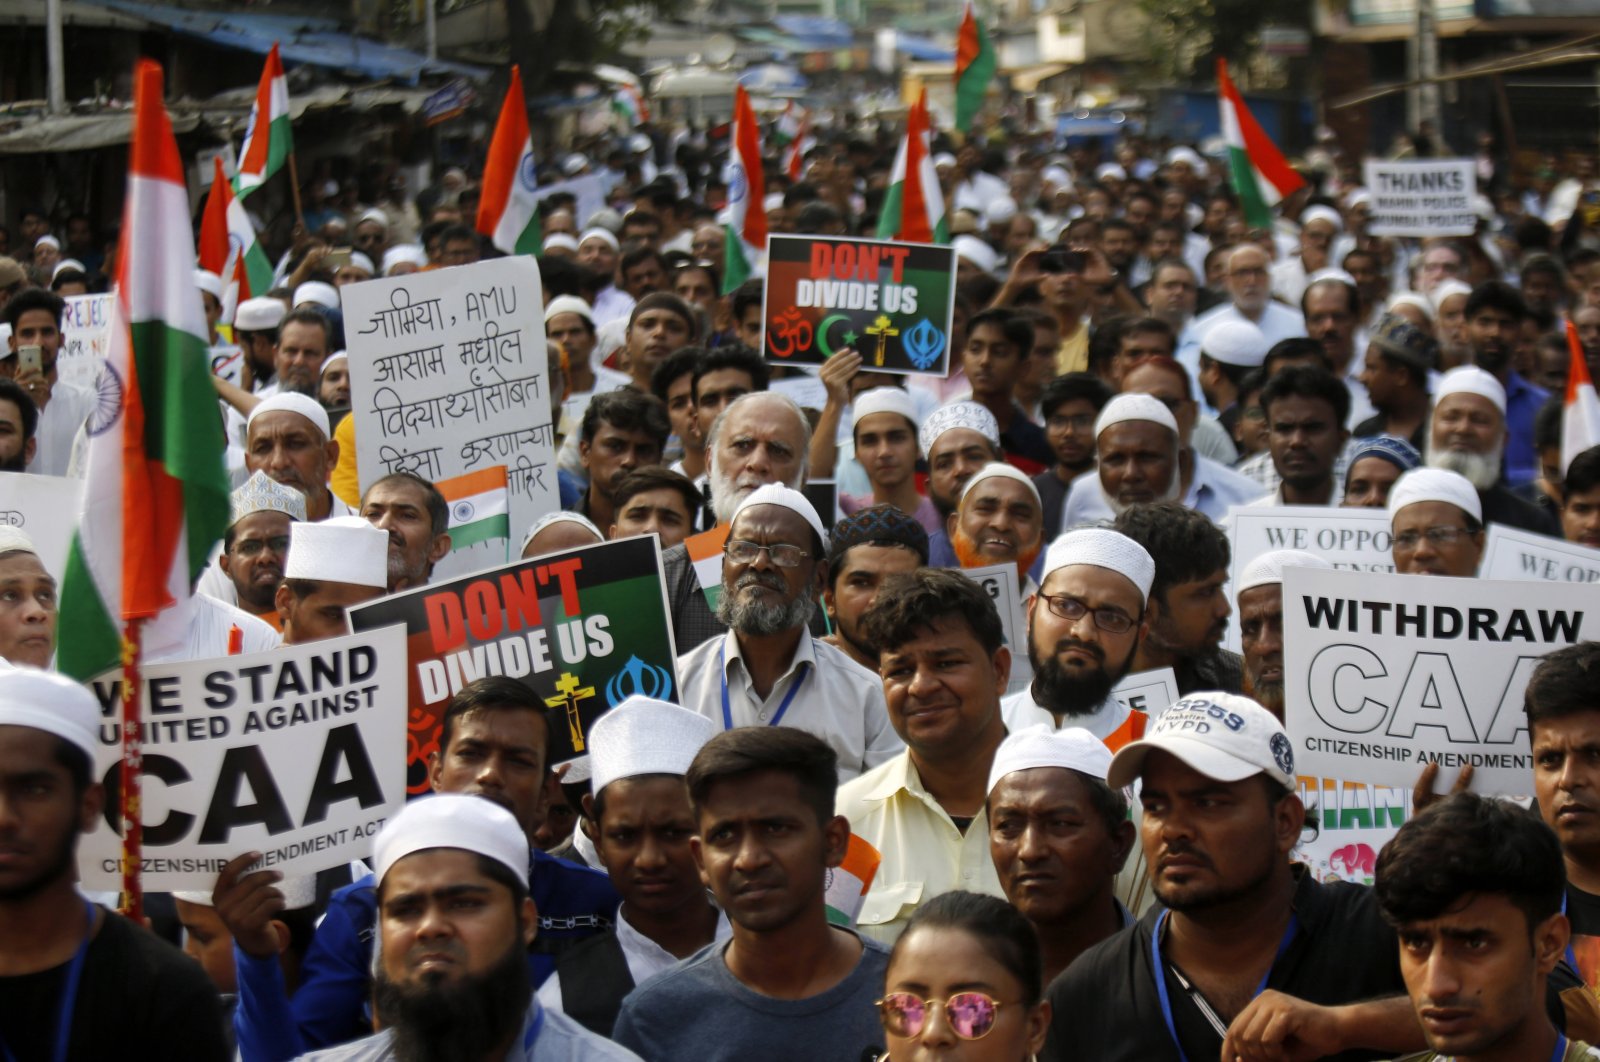 People participate in a protest rally against the Citizen Amendment Act in Mumbai, India, Dec. 28, 2019. (AP Photo)